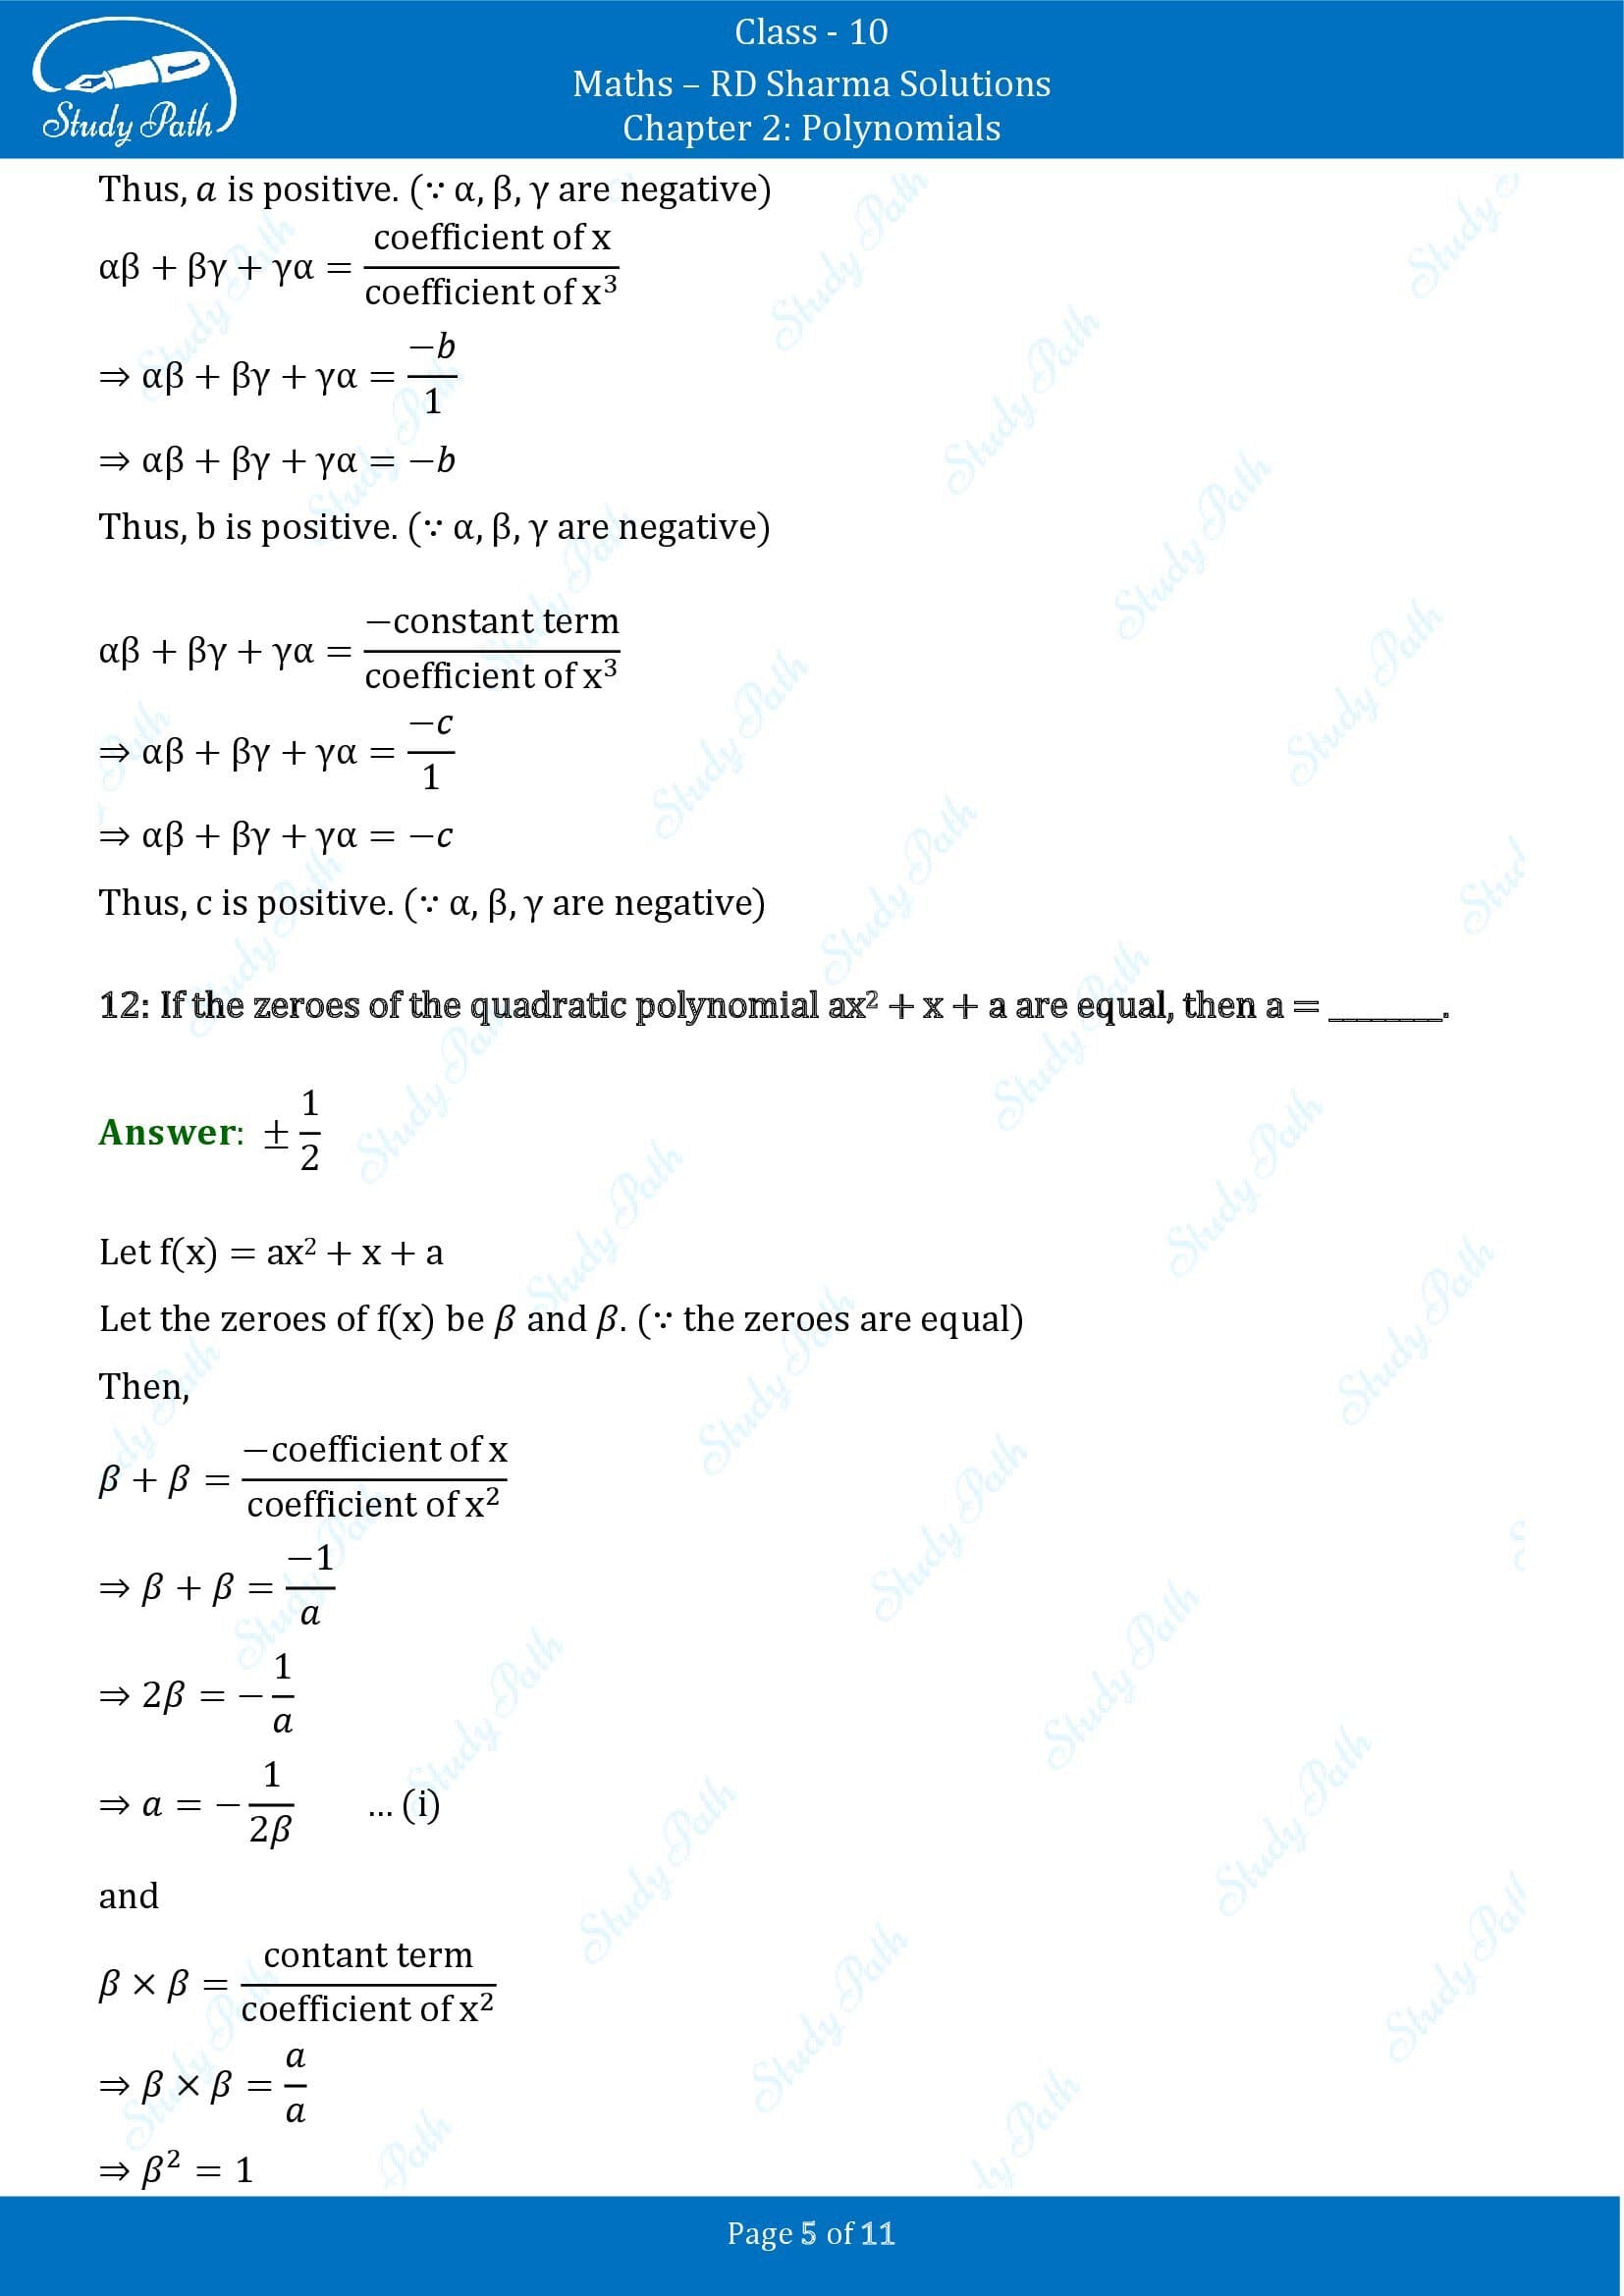 RD Sharma Solutions Class 10 Chapter 2 Polynomials Fill in the Blank Type Questions FBQs 00005